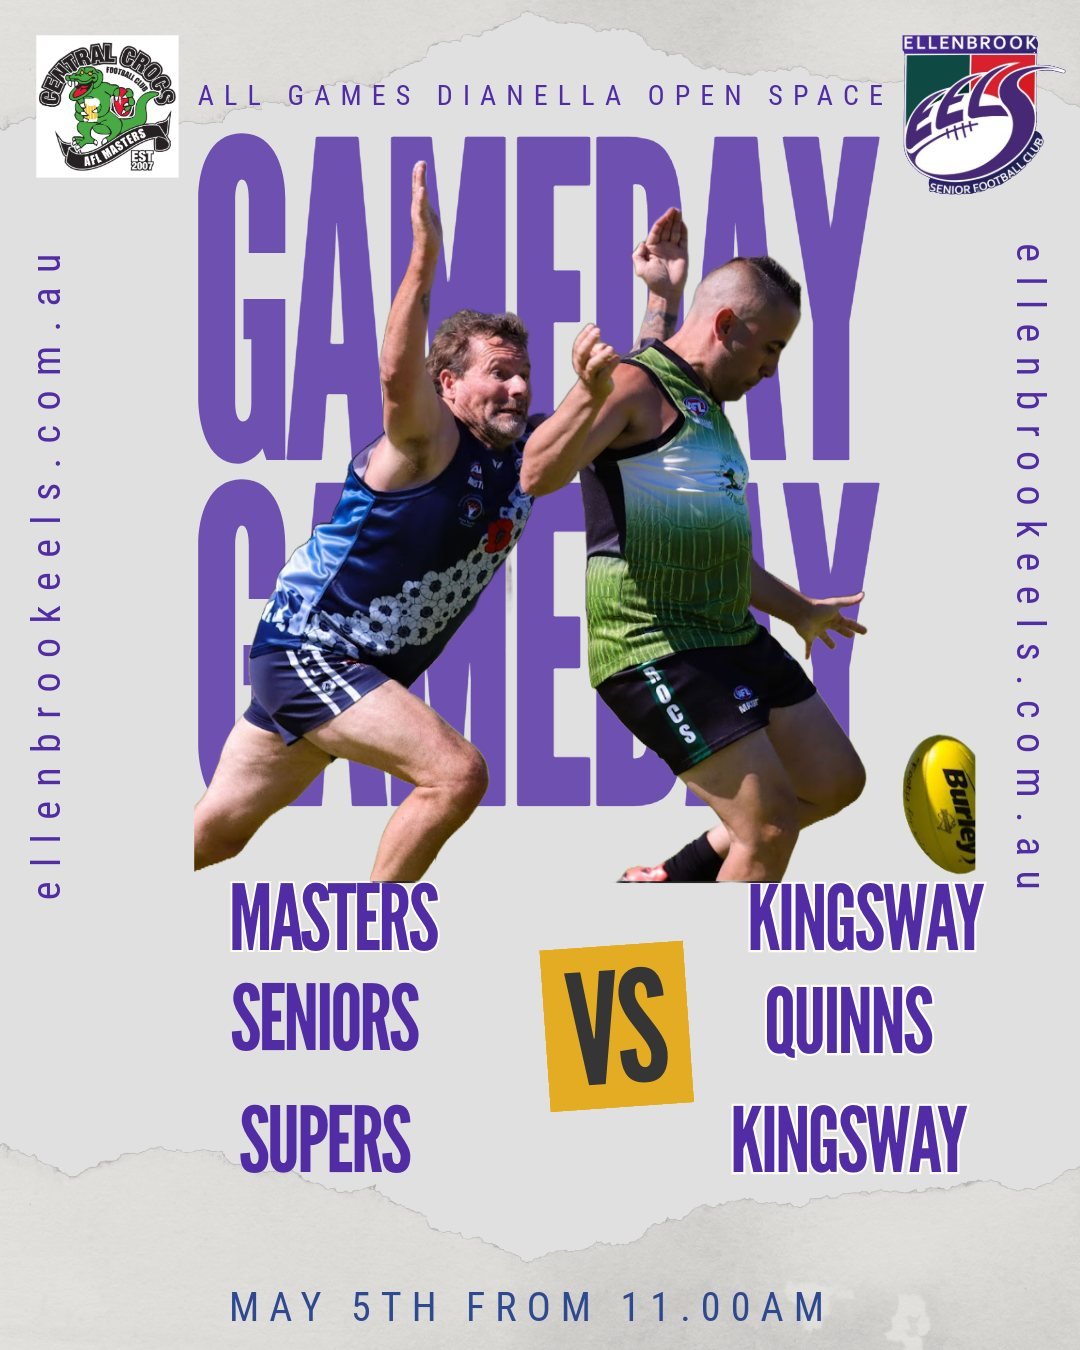 GET UP IT'S GAME DAY

Our AFL Masters Western Australia Eels and Central Crocs Football Club - AFL Masters teams are on display today at Dianella Open Space:

Supers v Kingsway - 10AM
Masters v Kingsway - 11.10AM
Seniors v Quinns - 1.30PM

Come down 